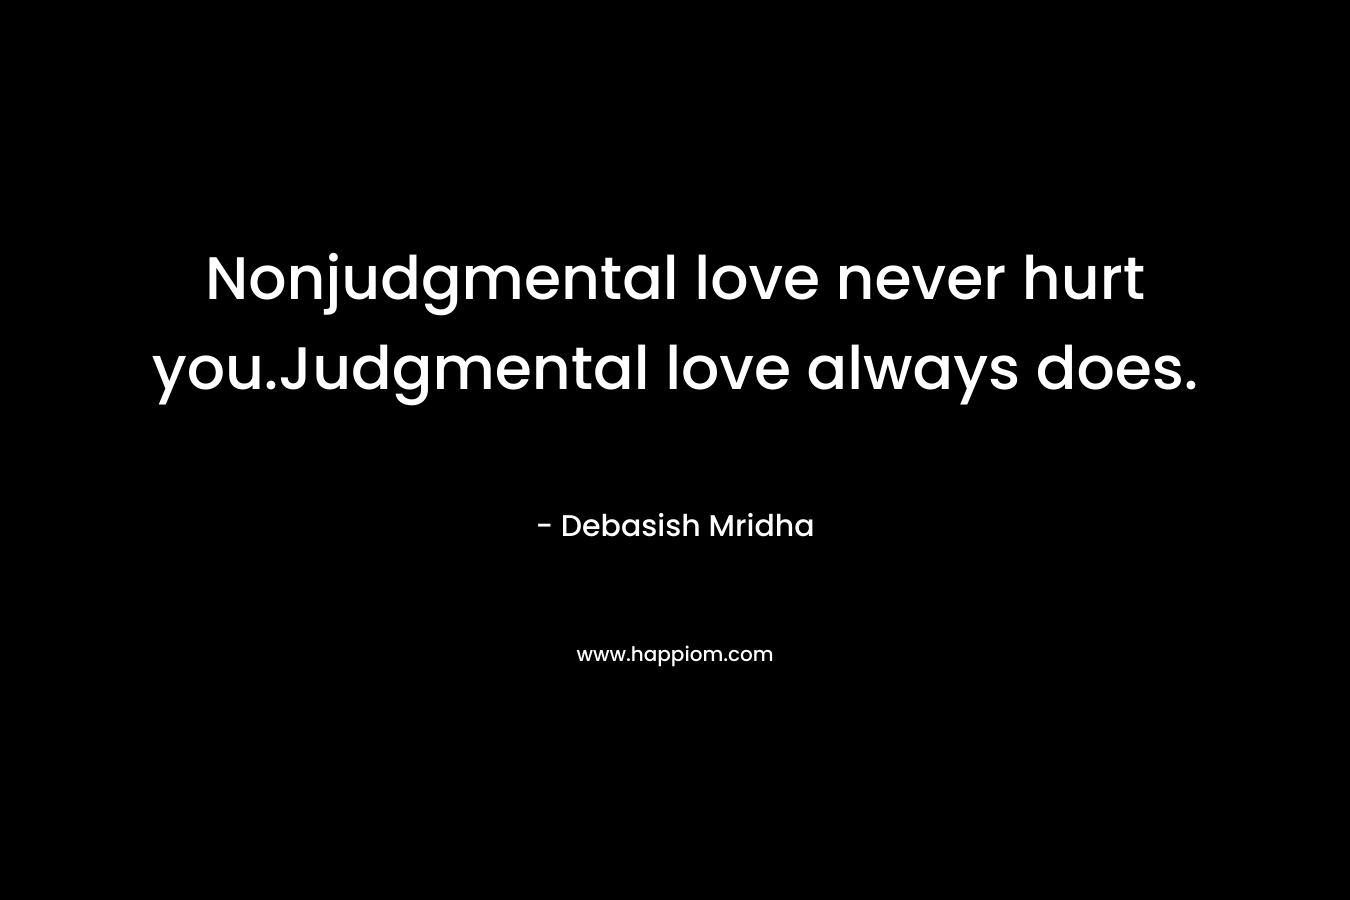 Nonjudgmental love never hurt you.Judgmental love always does.